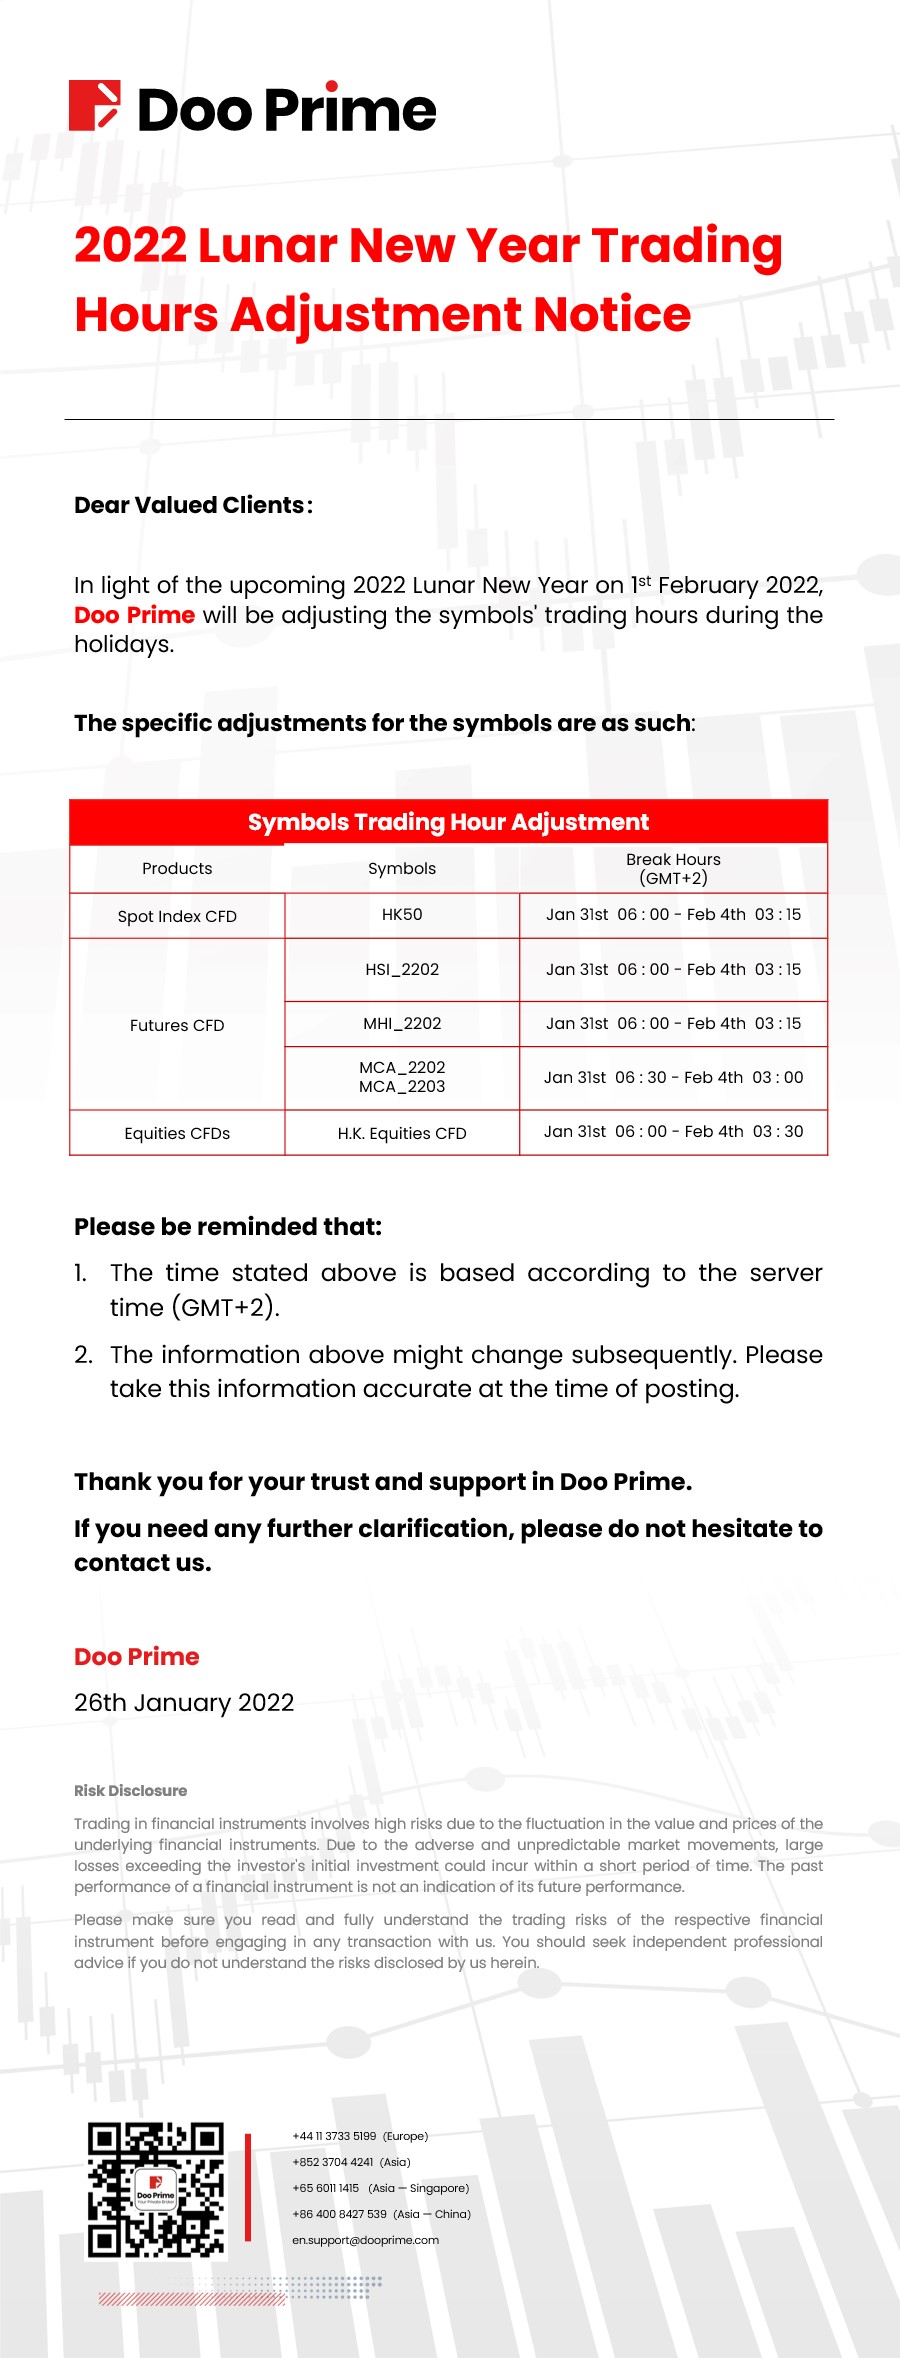 Doo Prime 2022 Lunar New Year Trading Hour Adjustment Notice